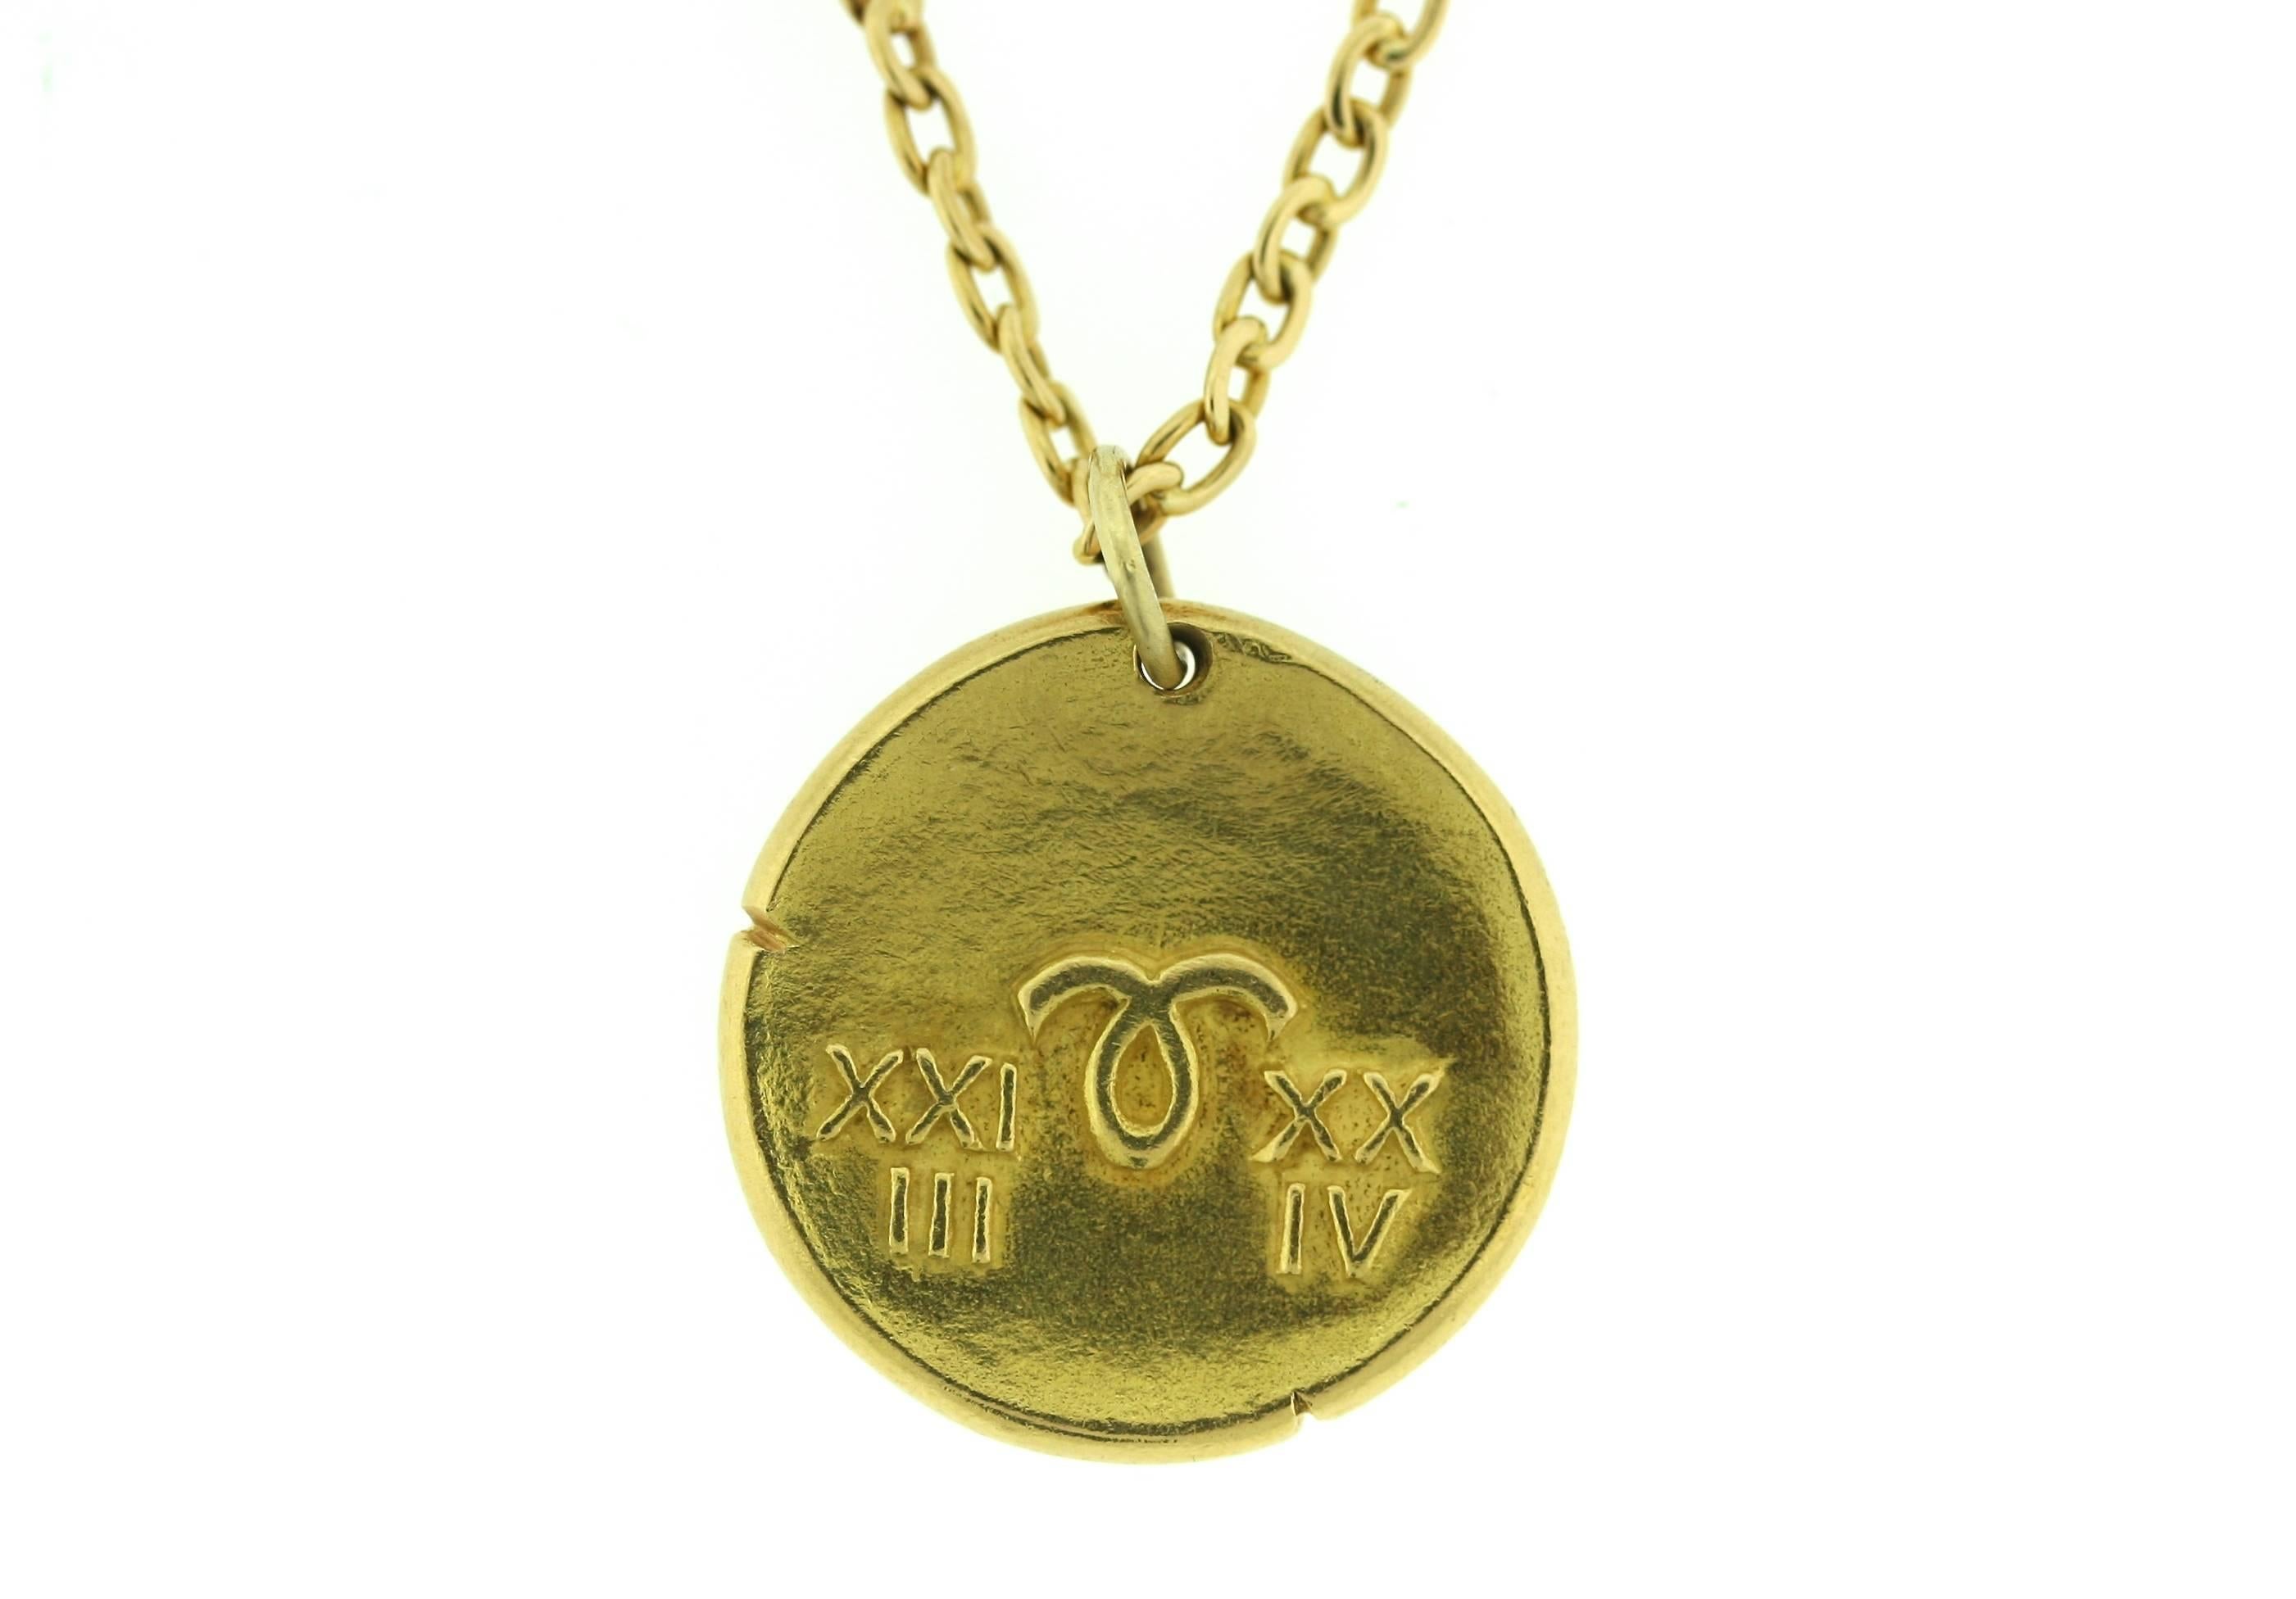 Van Cleef & Arpels 18k gold Aries zodiac pendant suspended from a VCA 18k gold chain. Pendant is 1